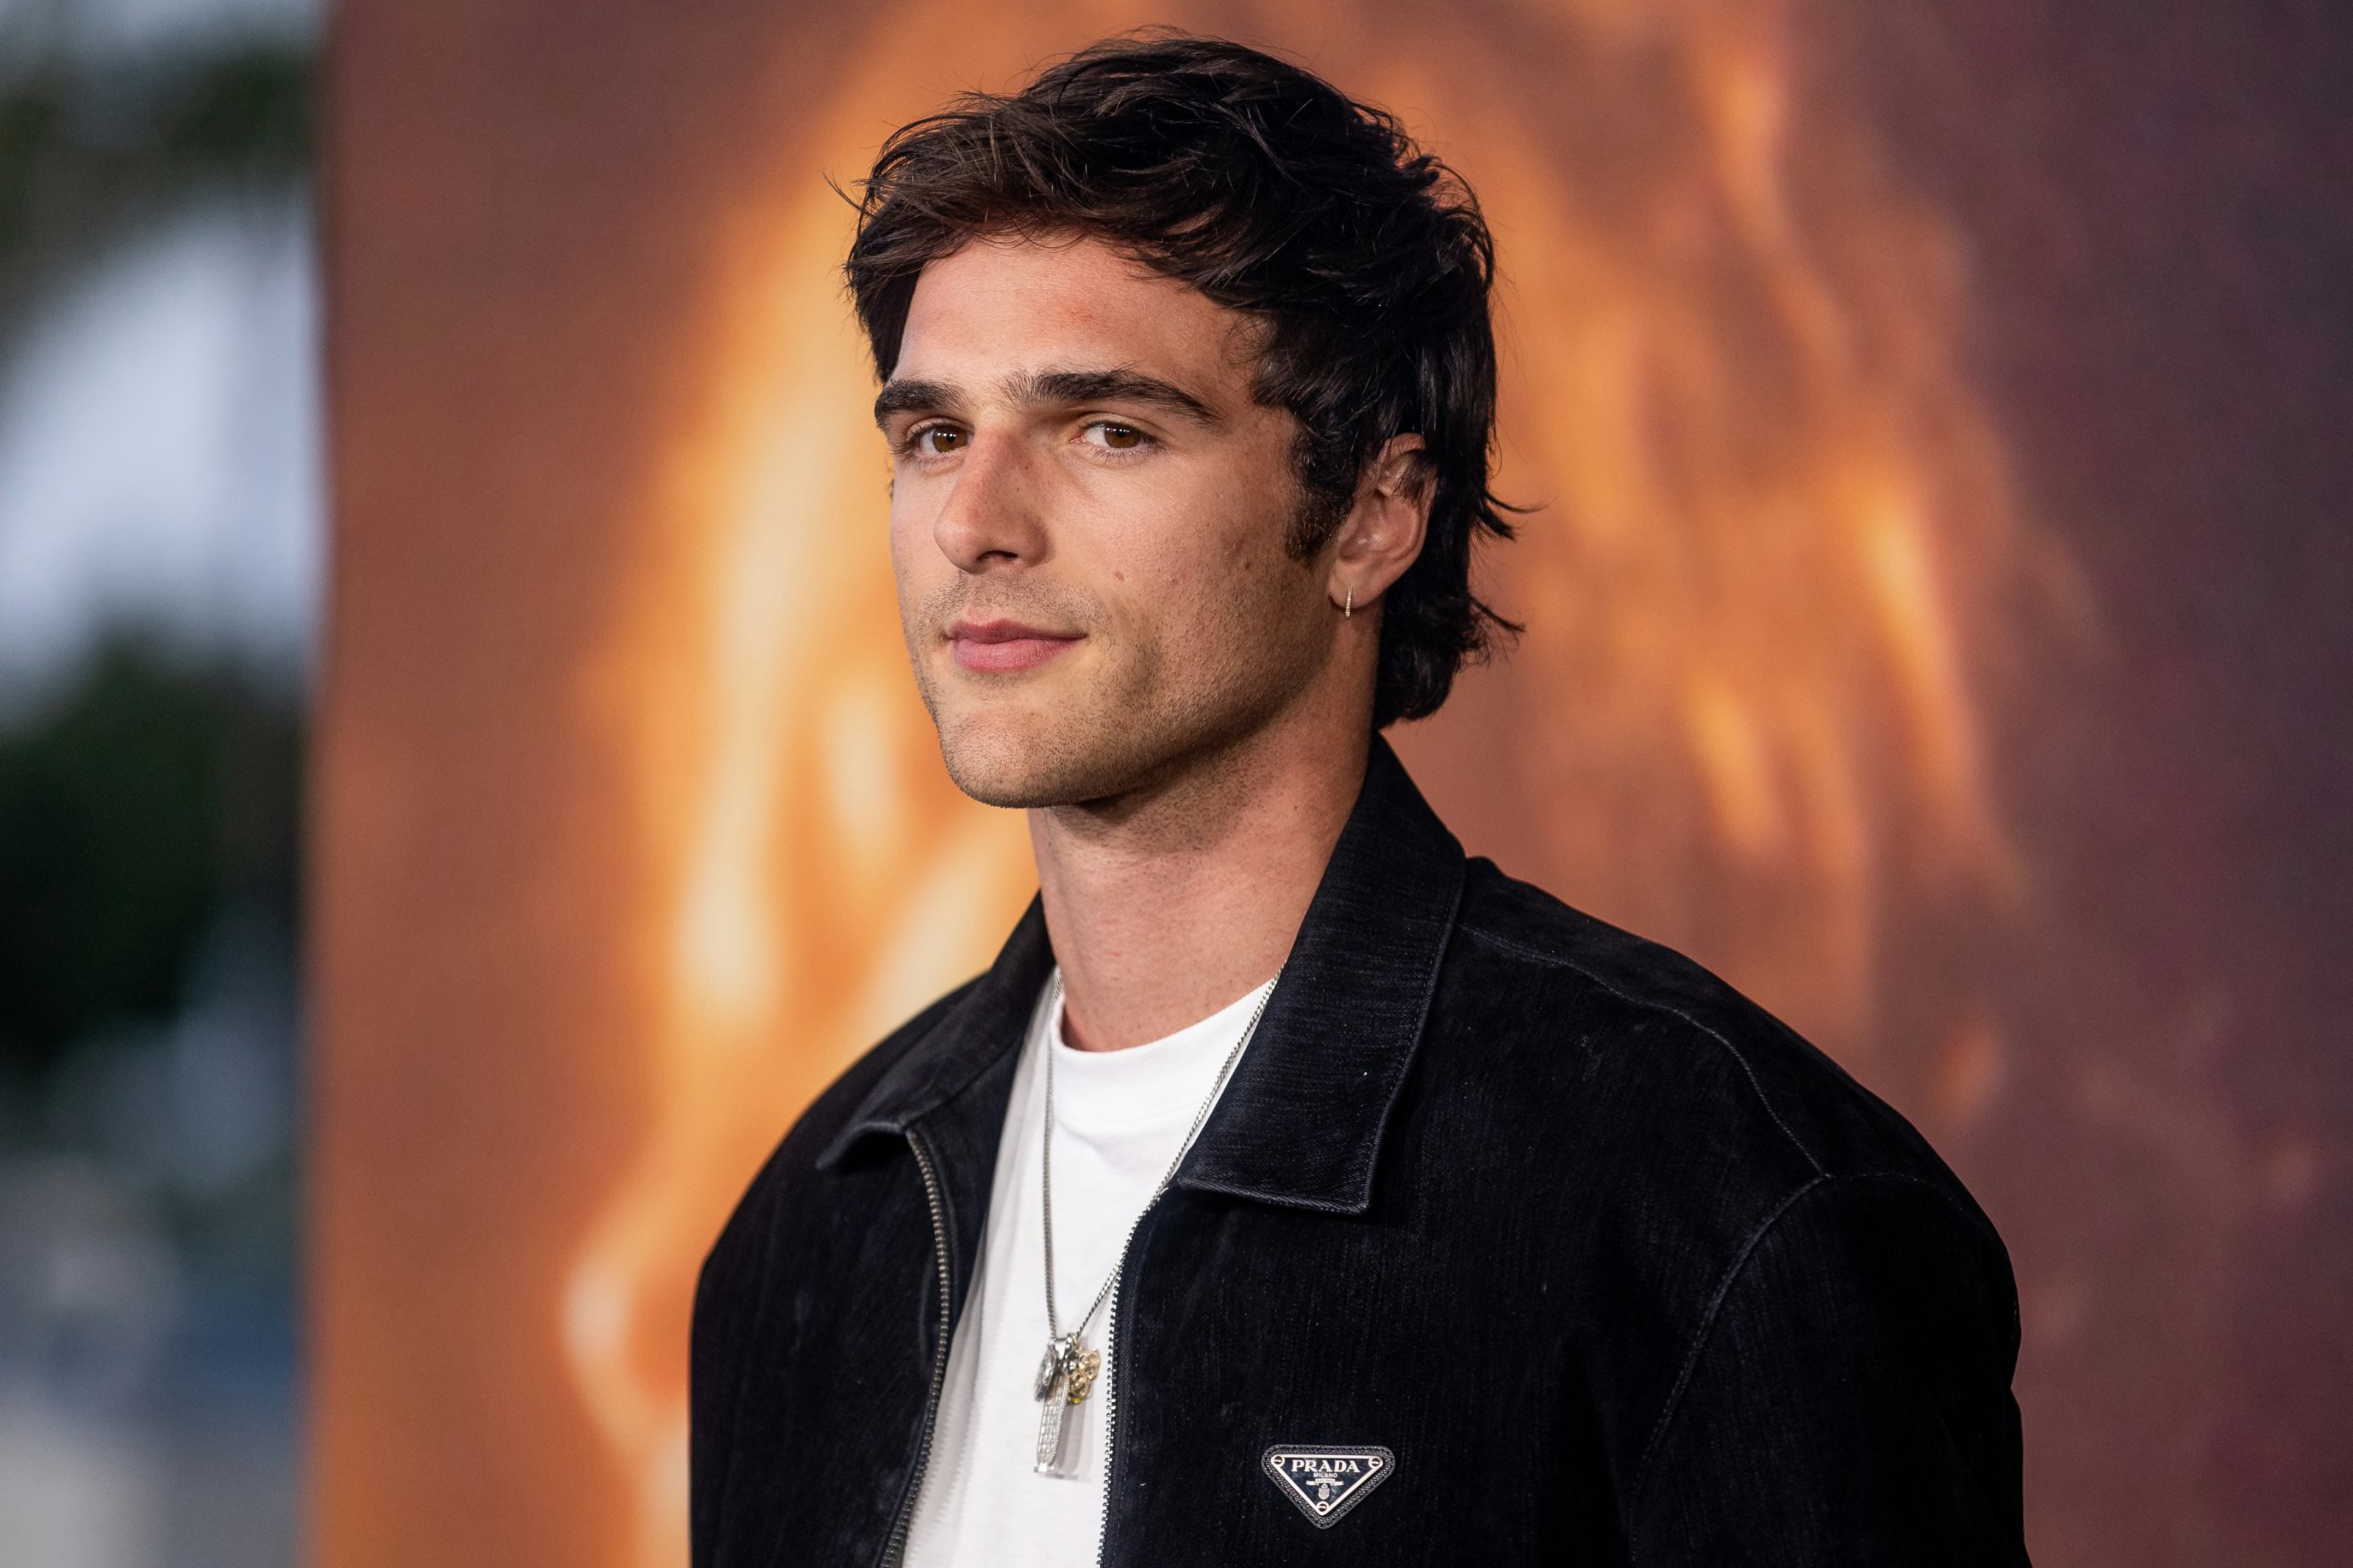 Why Jacob Elordi could replace Henry Cavill as Superman